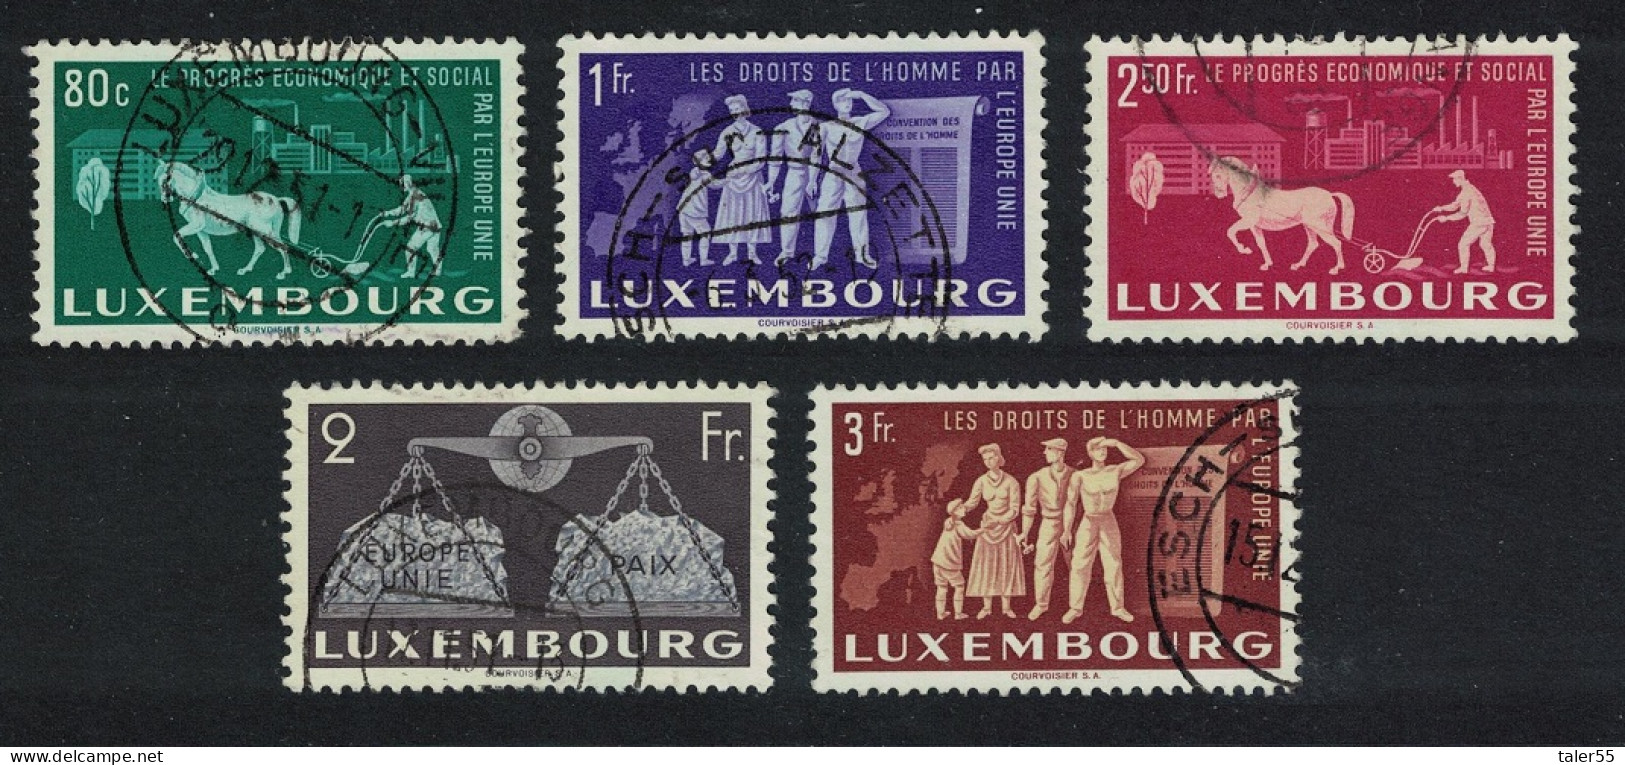 Luxembourg To Promote United Europe 5v 1951 Canc SG#543-547 MI#478-482 - Oblitérés